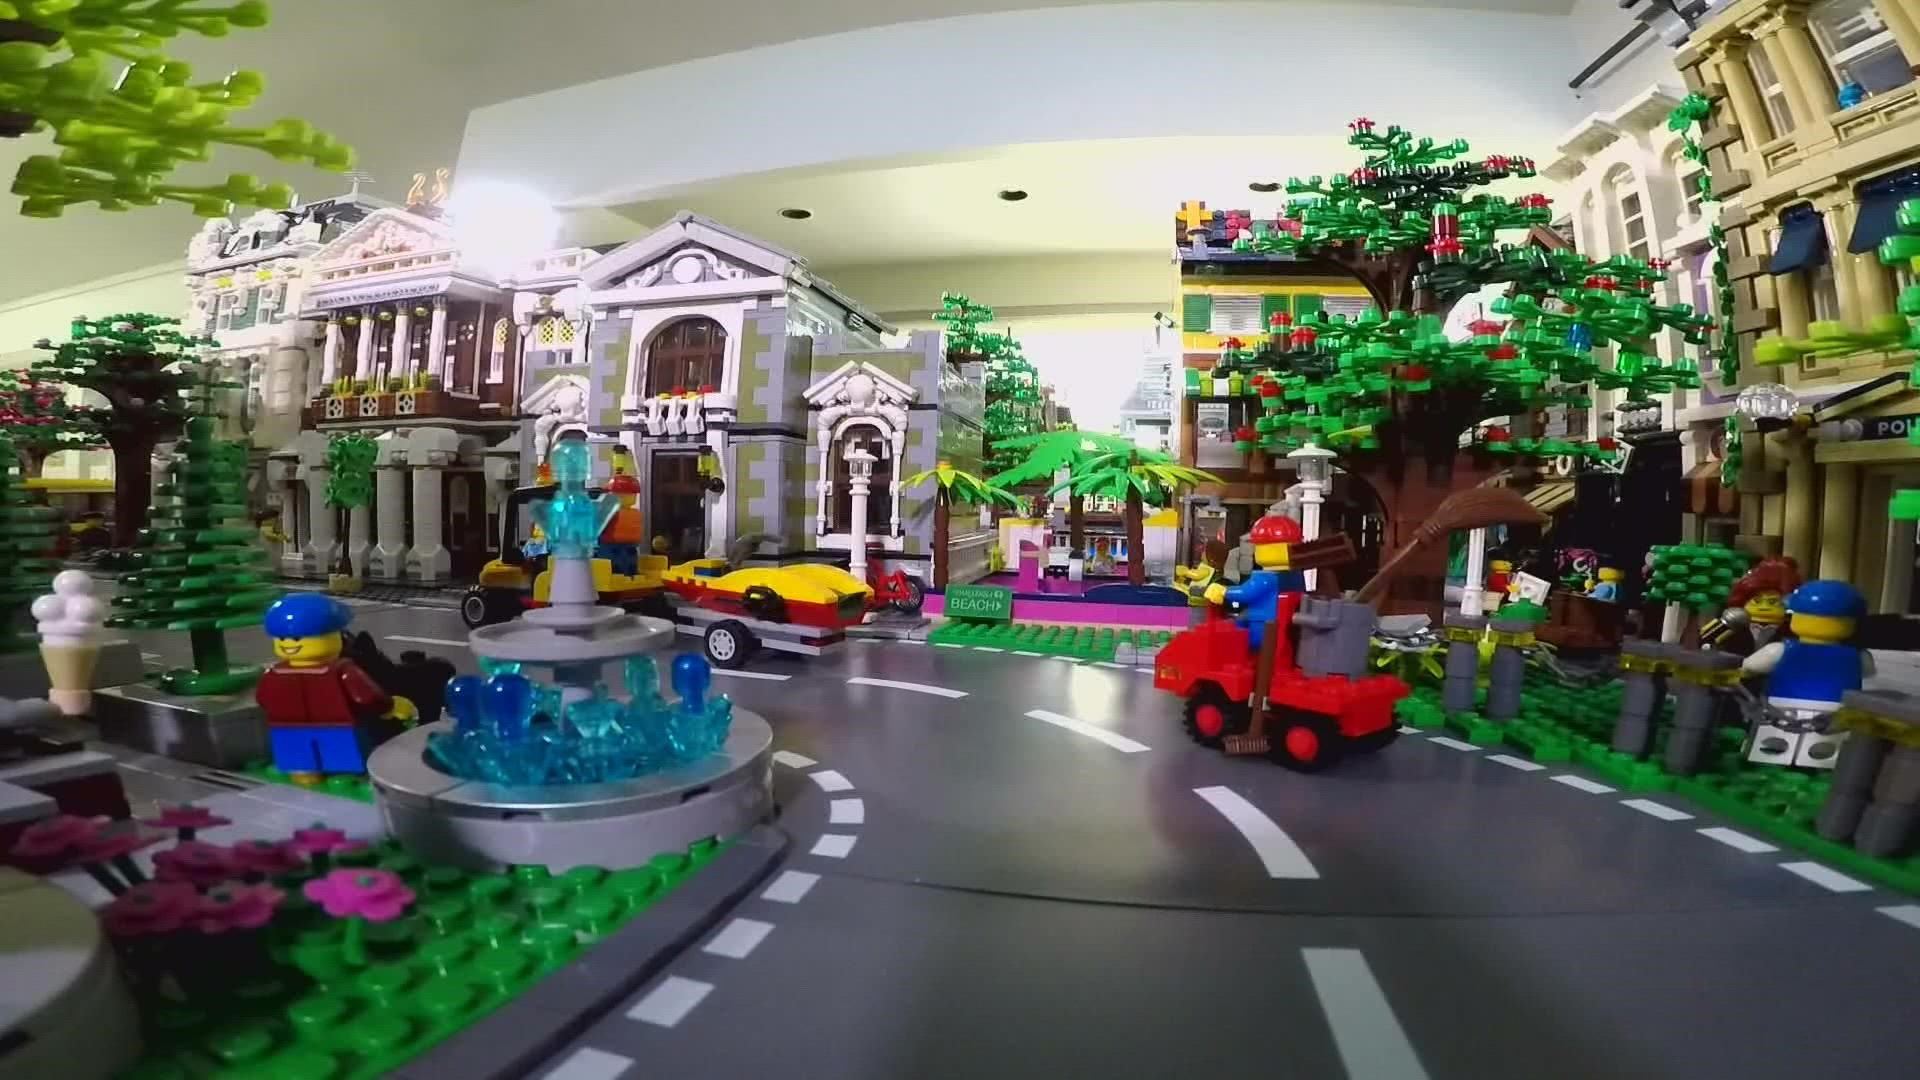 The city created a stop motion budget video from Legos to create engagement and it now has nearly 1 million views